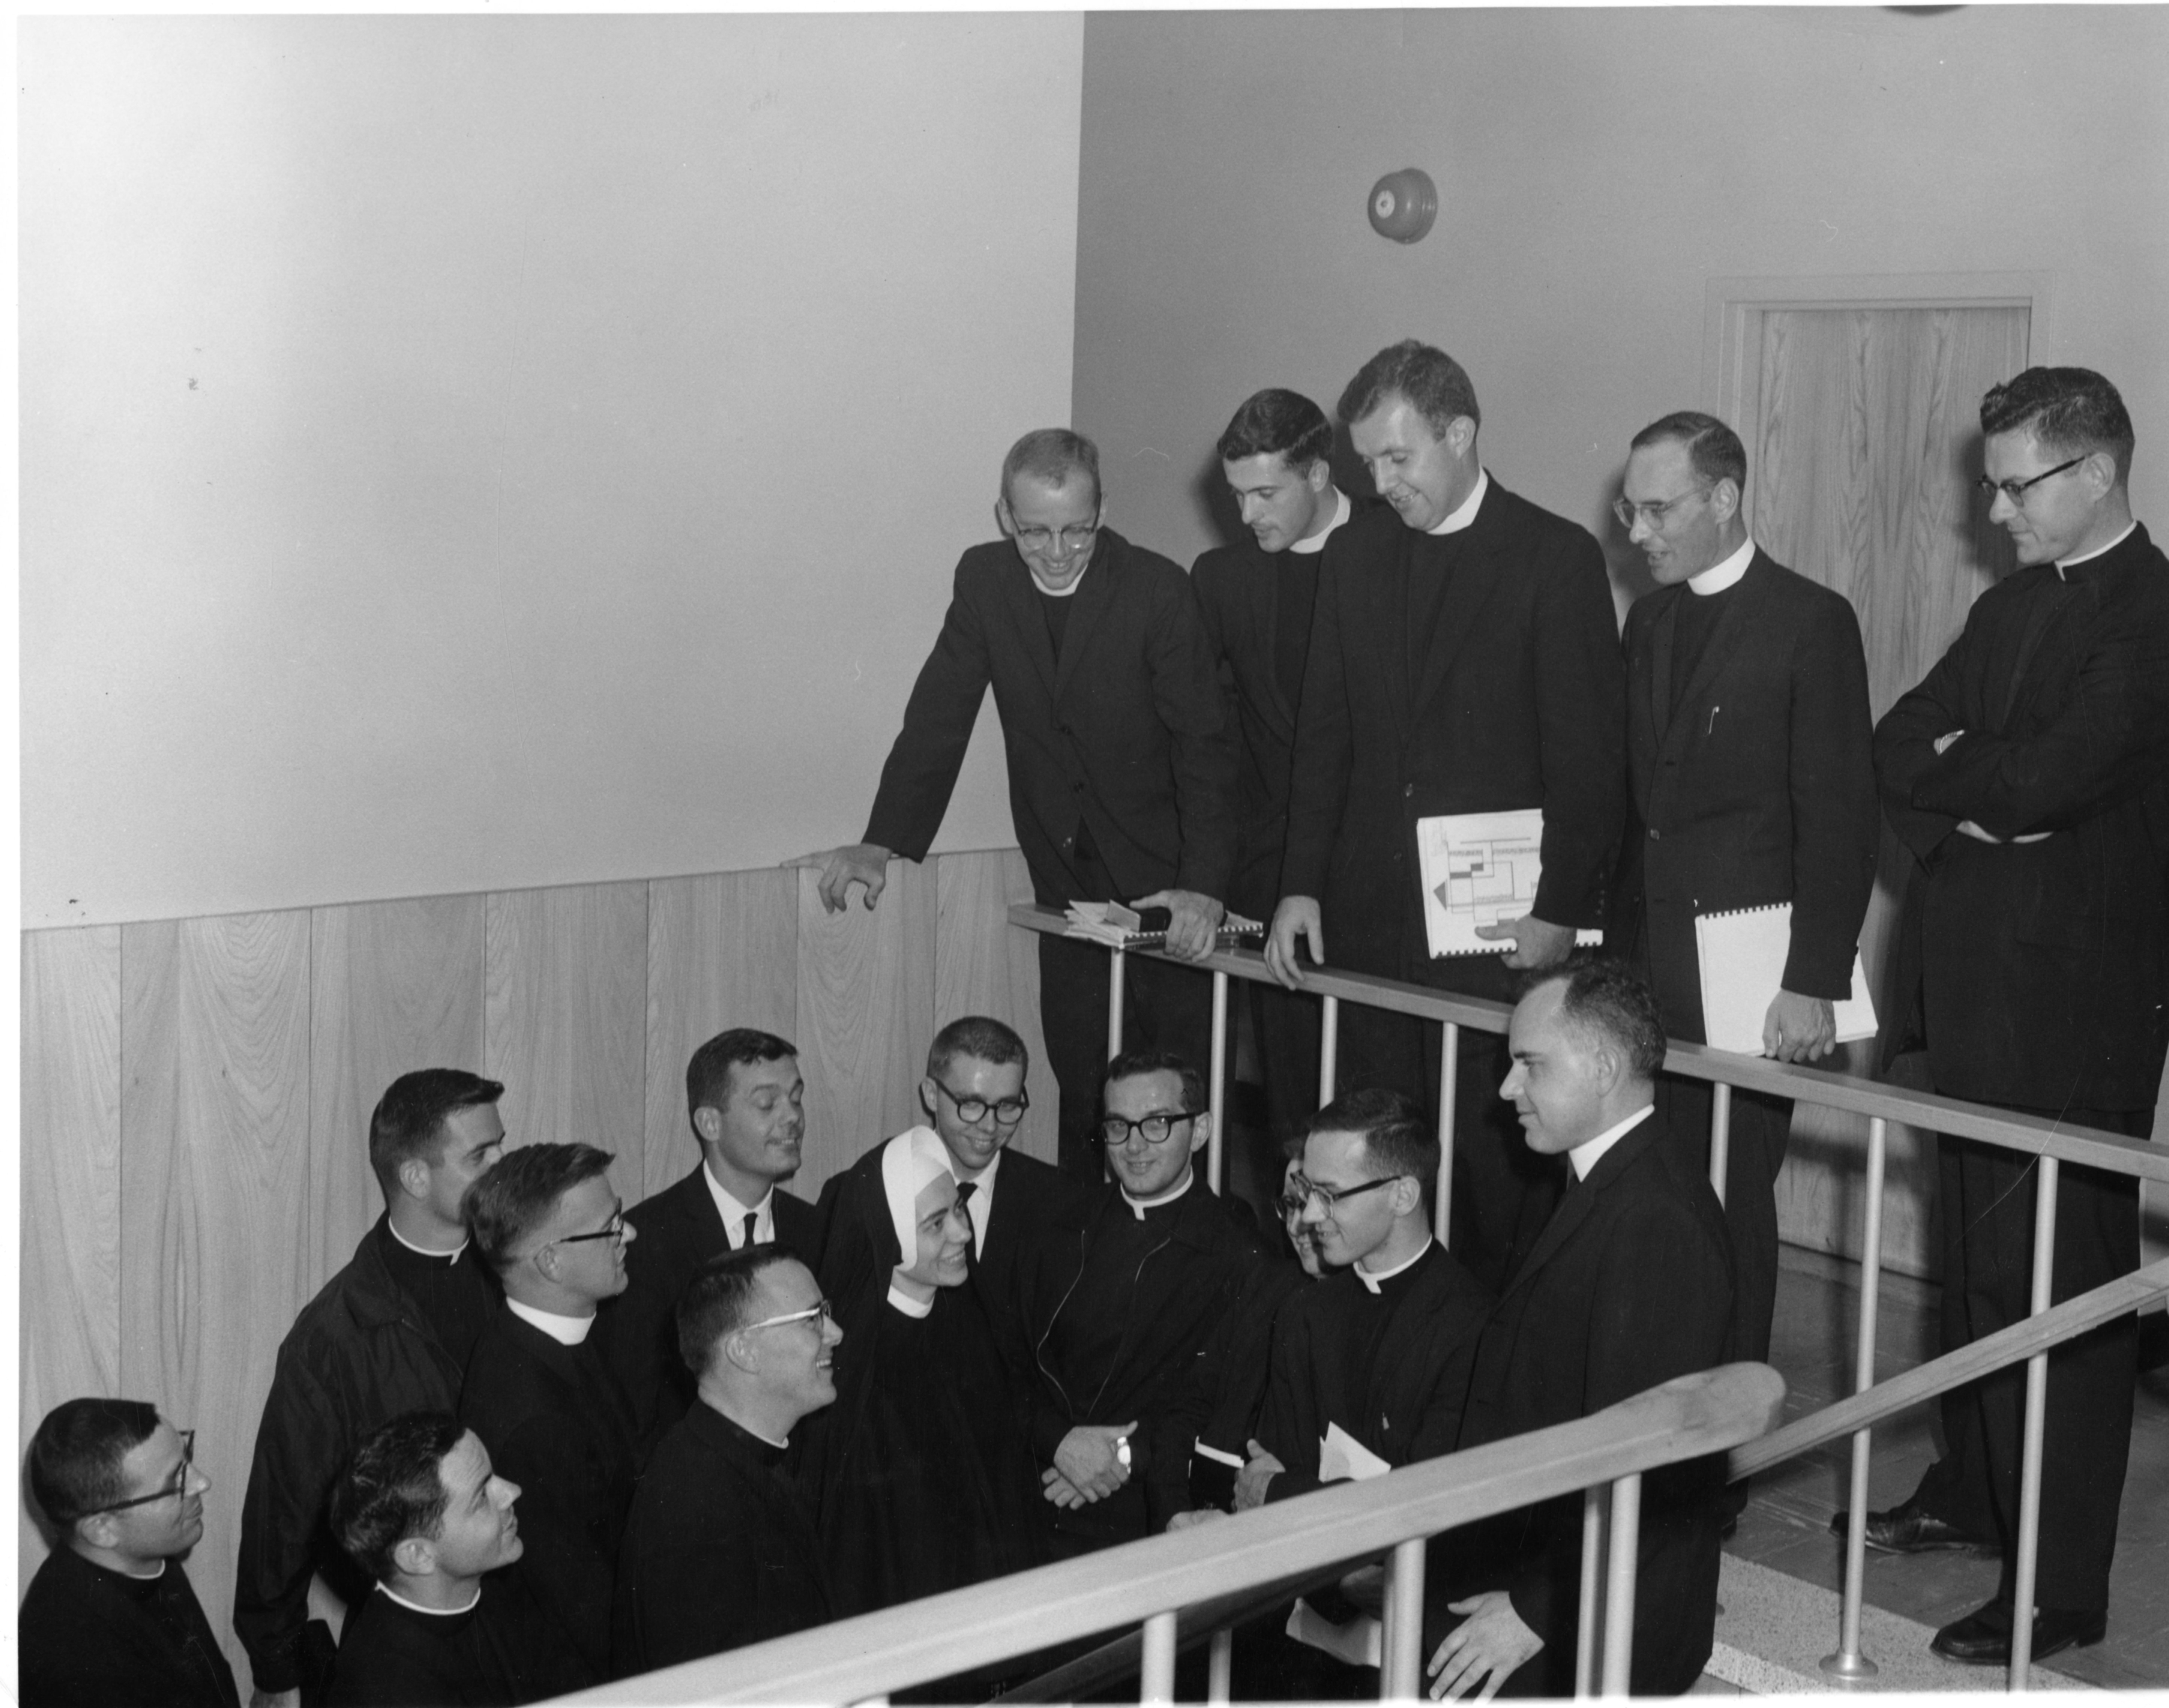 Carol Frances jegen BVM in habit surrounded by males at a religious education workshop